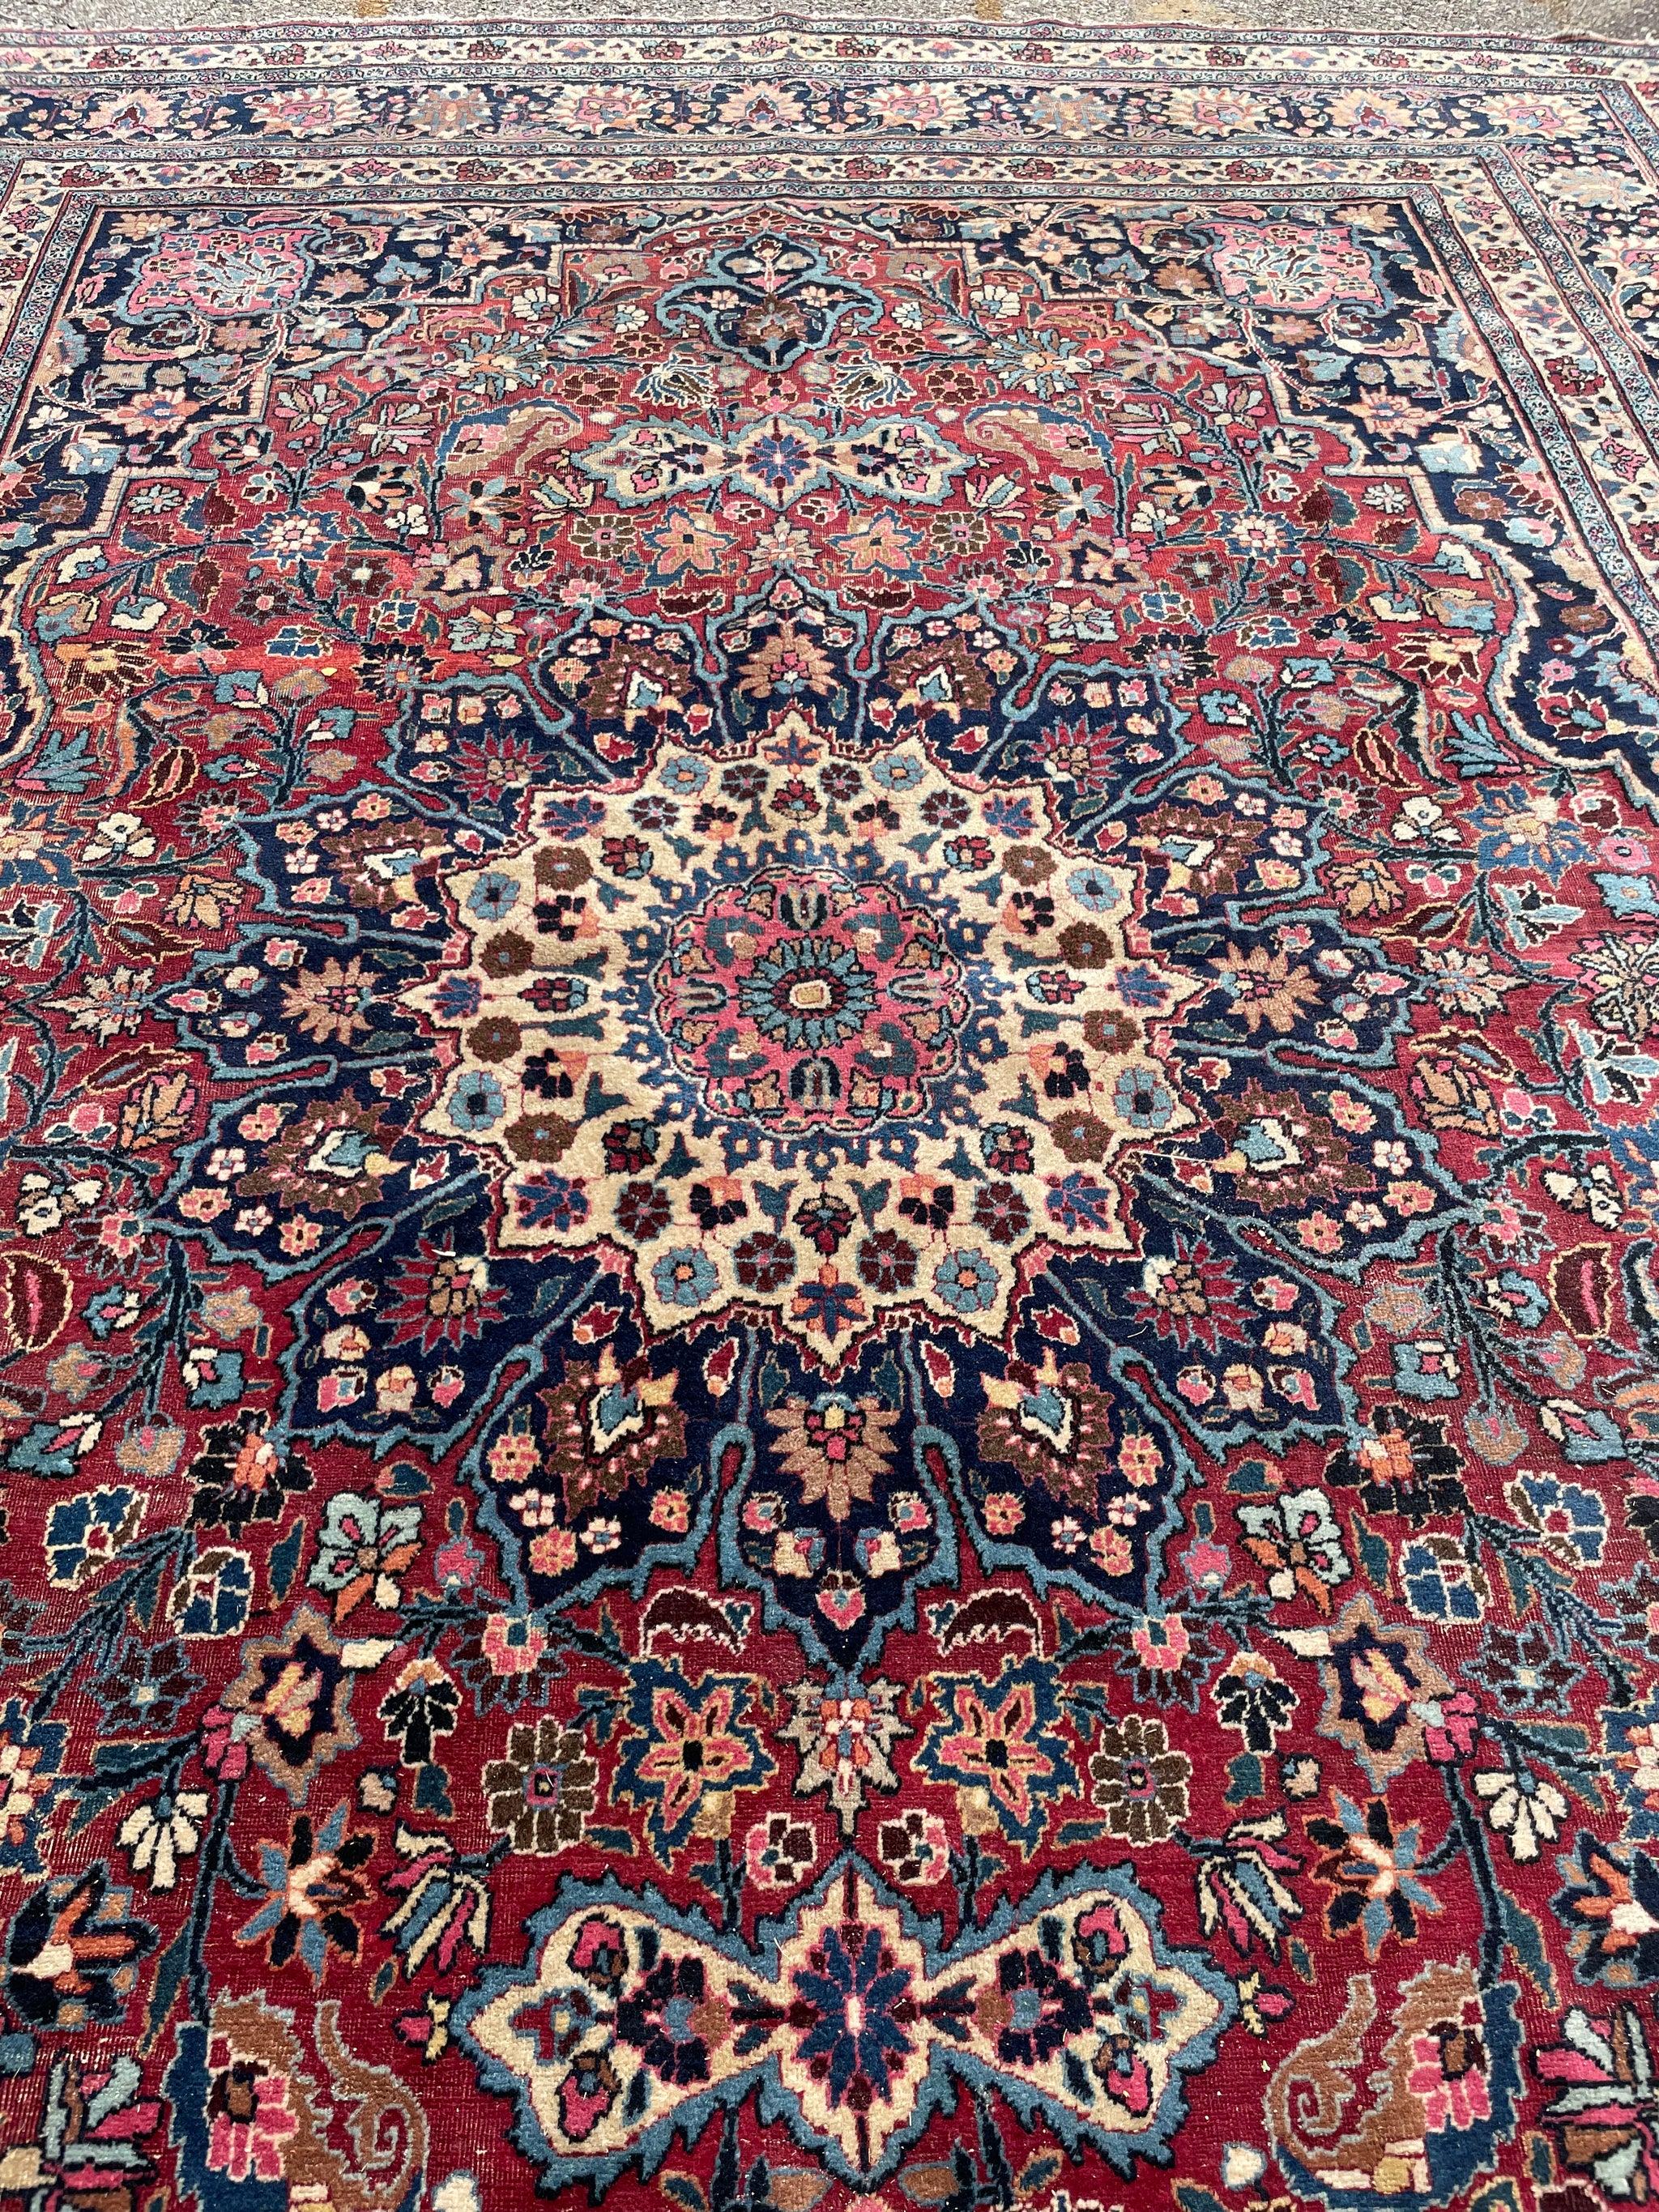 Glowing Northeast Timeless Antique Rug with Blooming Jewel Flora, c.1940's For Sale 5